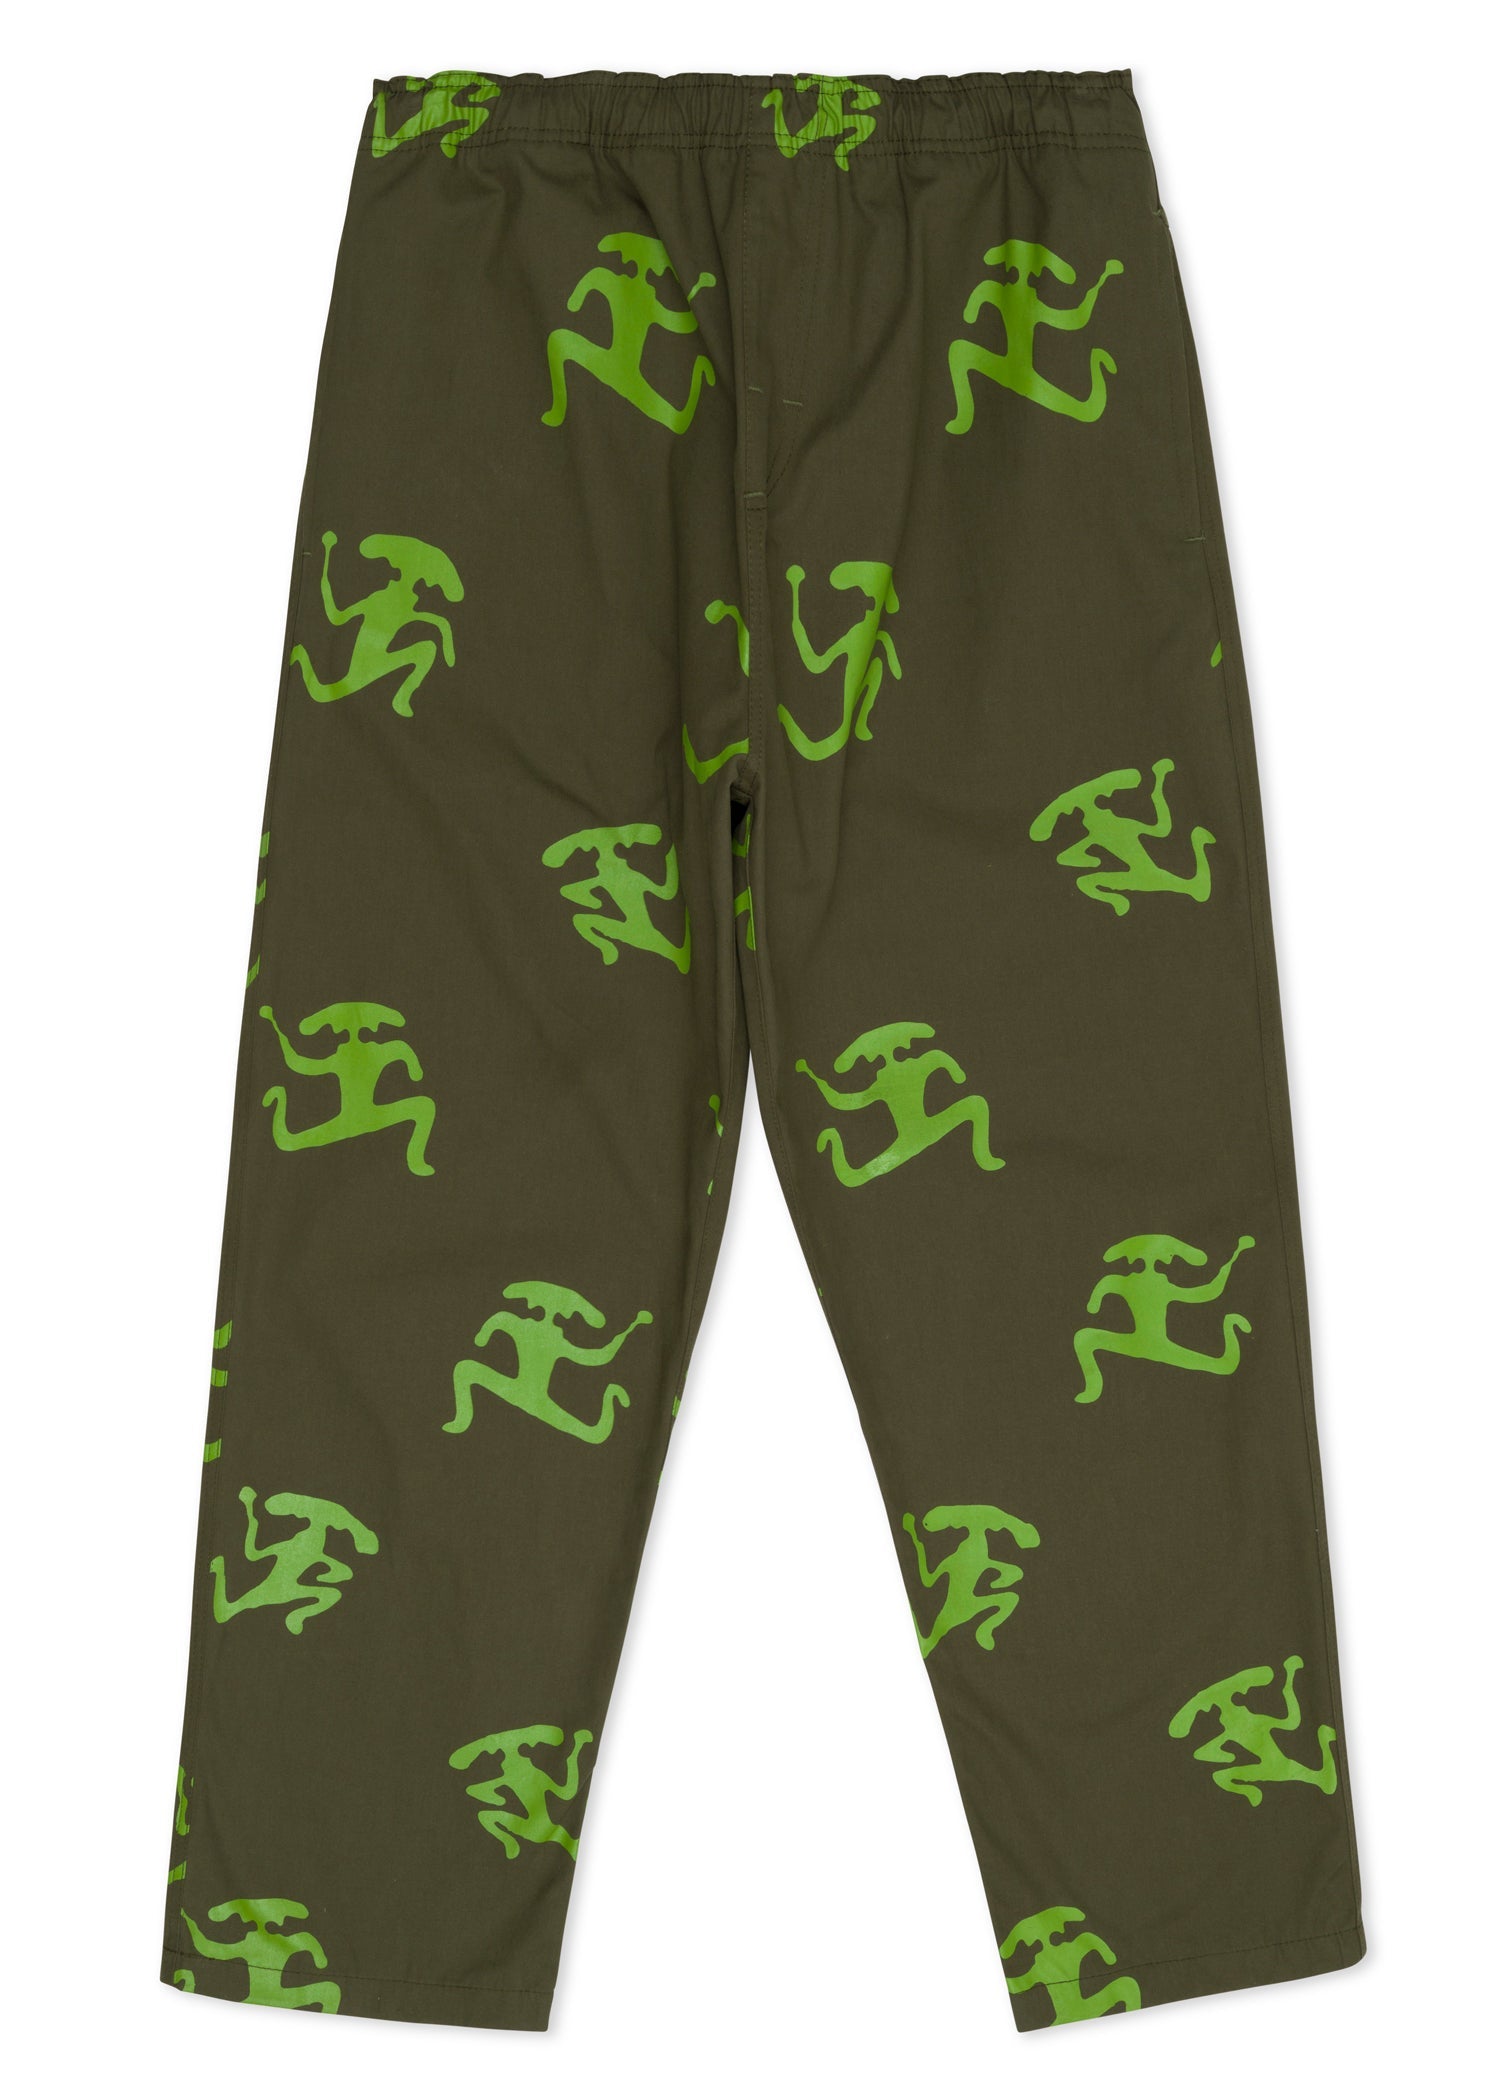 Cave Painting Beach Pants